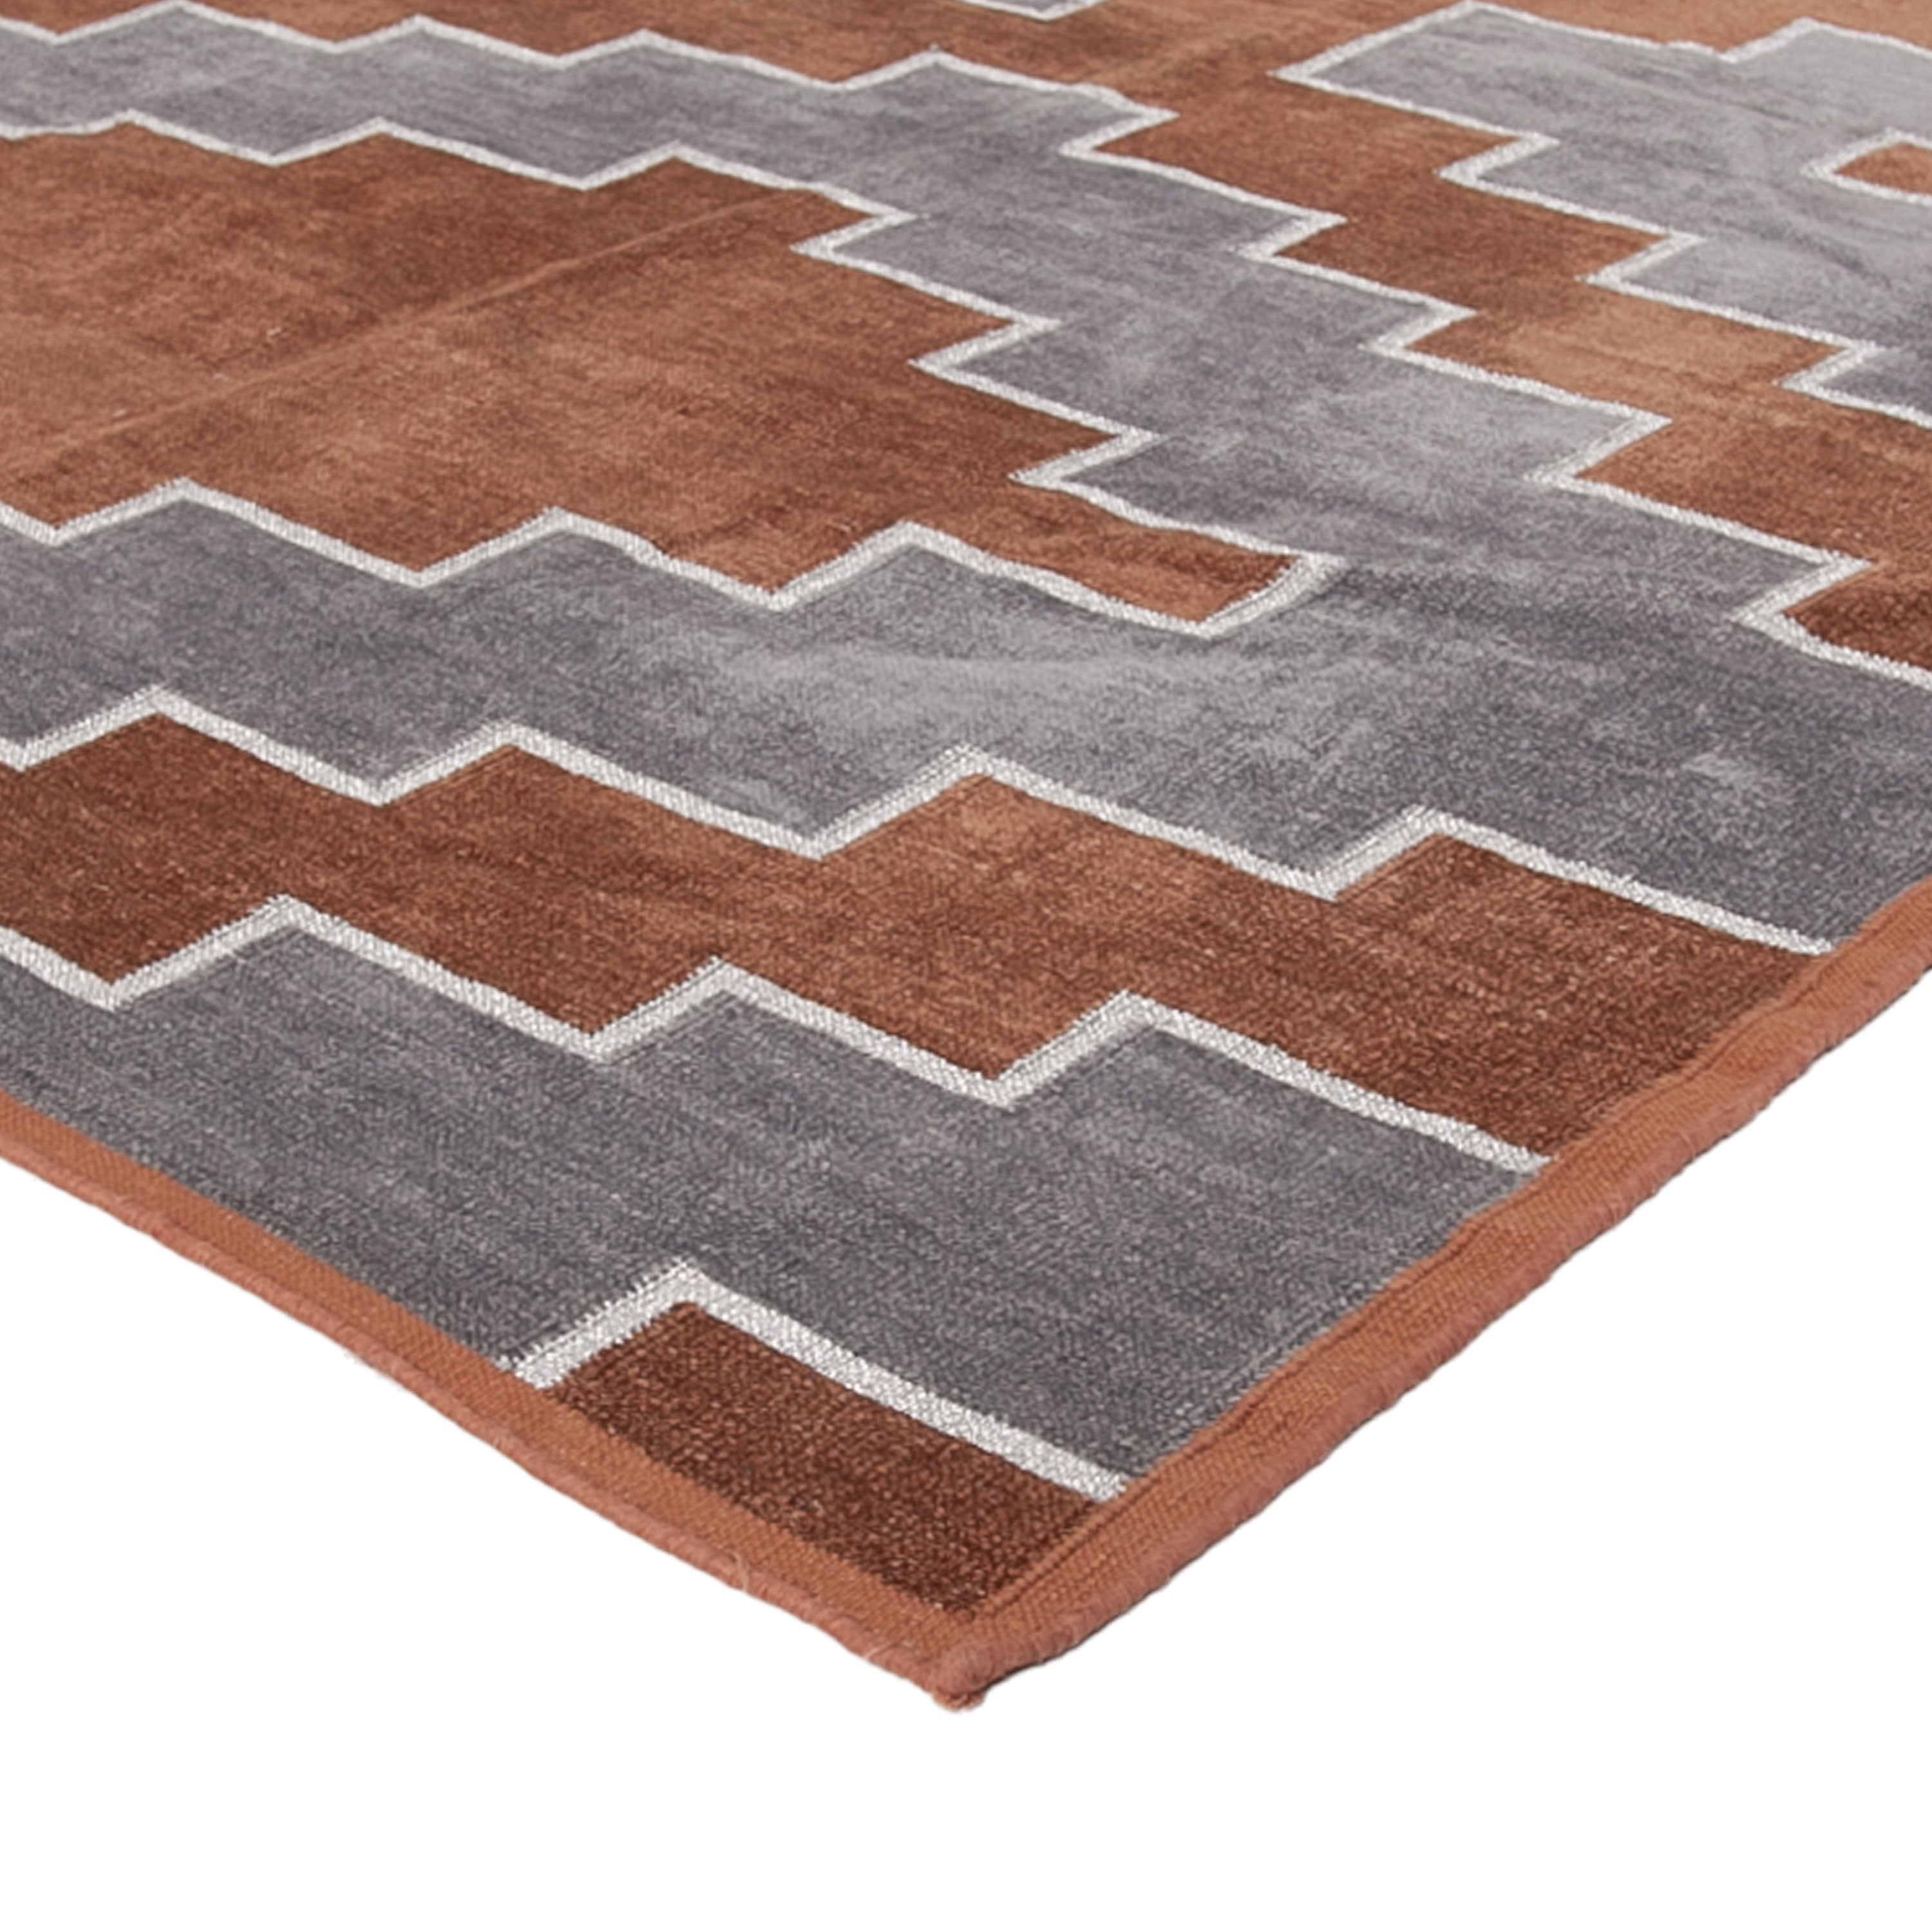 Brown and Grey Flatweave Chenille Rug - 3'6" x 5'6"